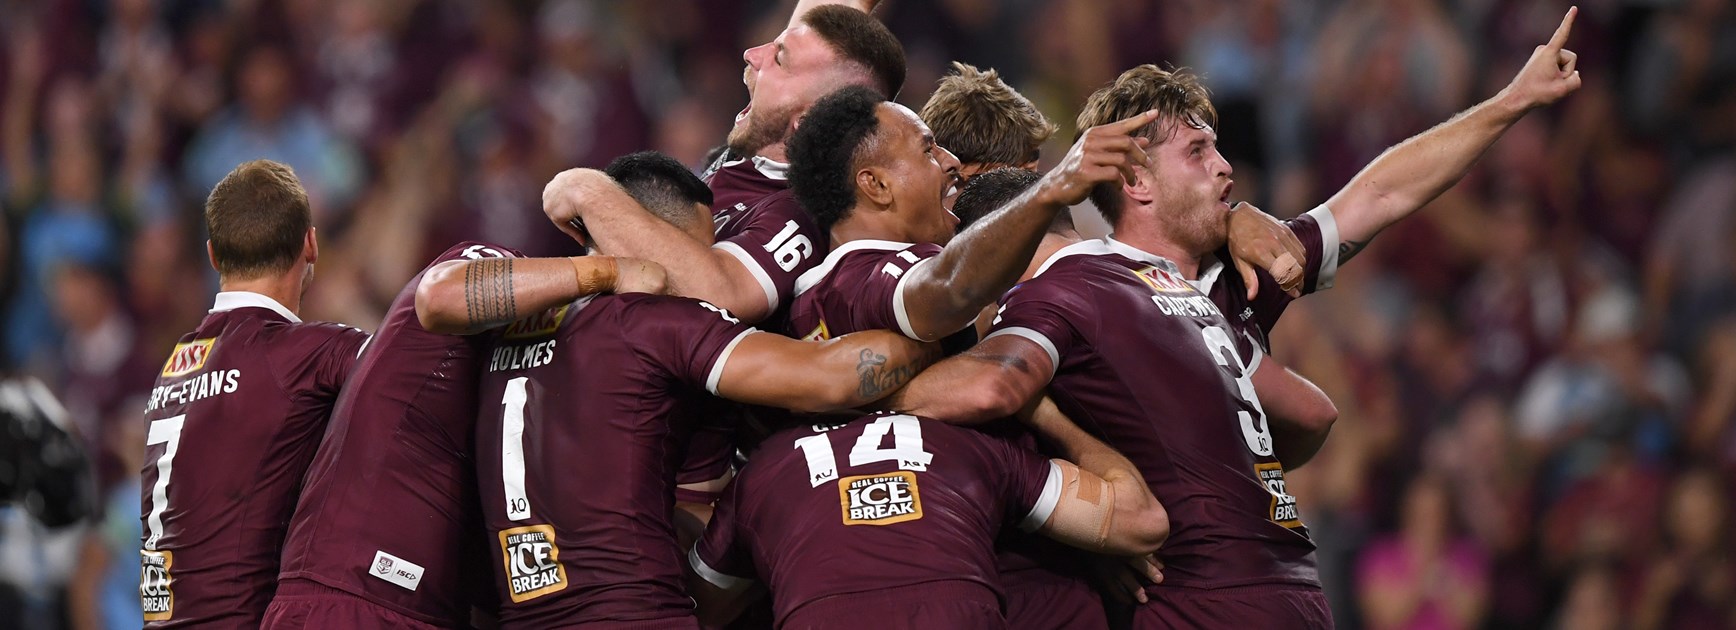 QRL Board meets to reflect on season and plan for future